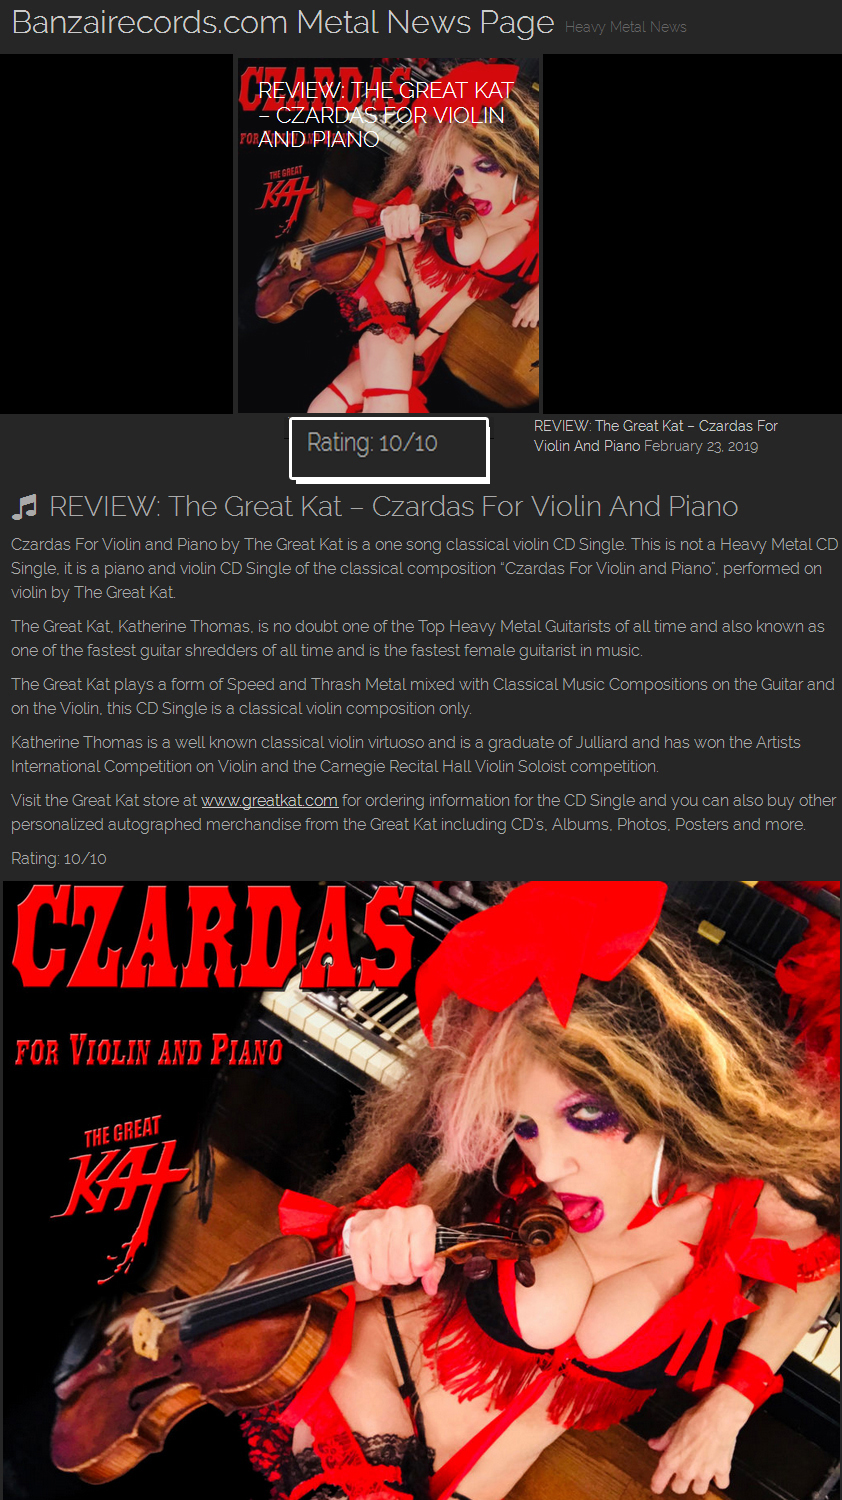 10/10 RATING! REVIEW of The Great Kat's "CZARDAS for VIOLIN AND PIANO" on BANZAIRECORDS.COM METAL NEWS! "Czardas For Violin and Piano by The Great Kat is a one song classical violin CD Single.The Great Kat, is one of the Top Heavy Metal Guitarists of all time, one of the fastest guitar shredders of all time and the fastest female guitarist in music. Katherine Thomas is a well known classical violin virtuoso and is a graduate of Juilliard and has won the Artists International Competition on Violin and the Carnegie Recital Hall Violin Soloist competition. Rating: 10/10" -BanzaiRecords.com! Read at https://banzairecords.com/blog/2019/02/23/review-the-great-kat-czardas-for-violin-and-piano 